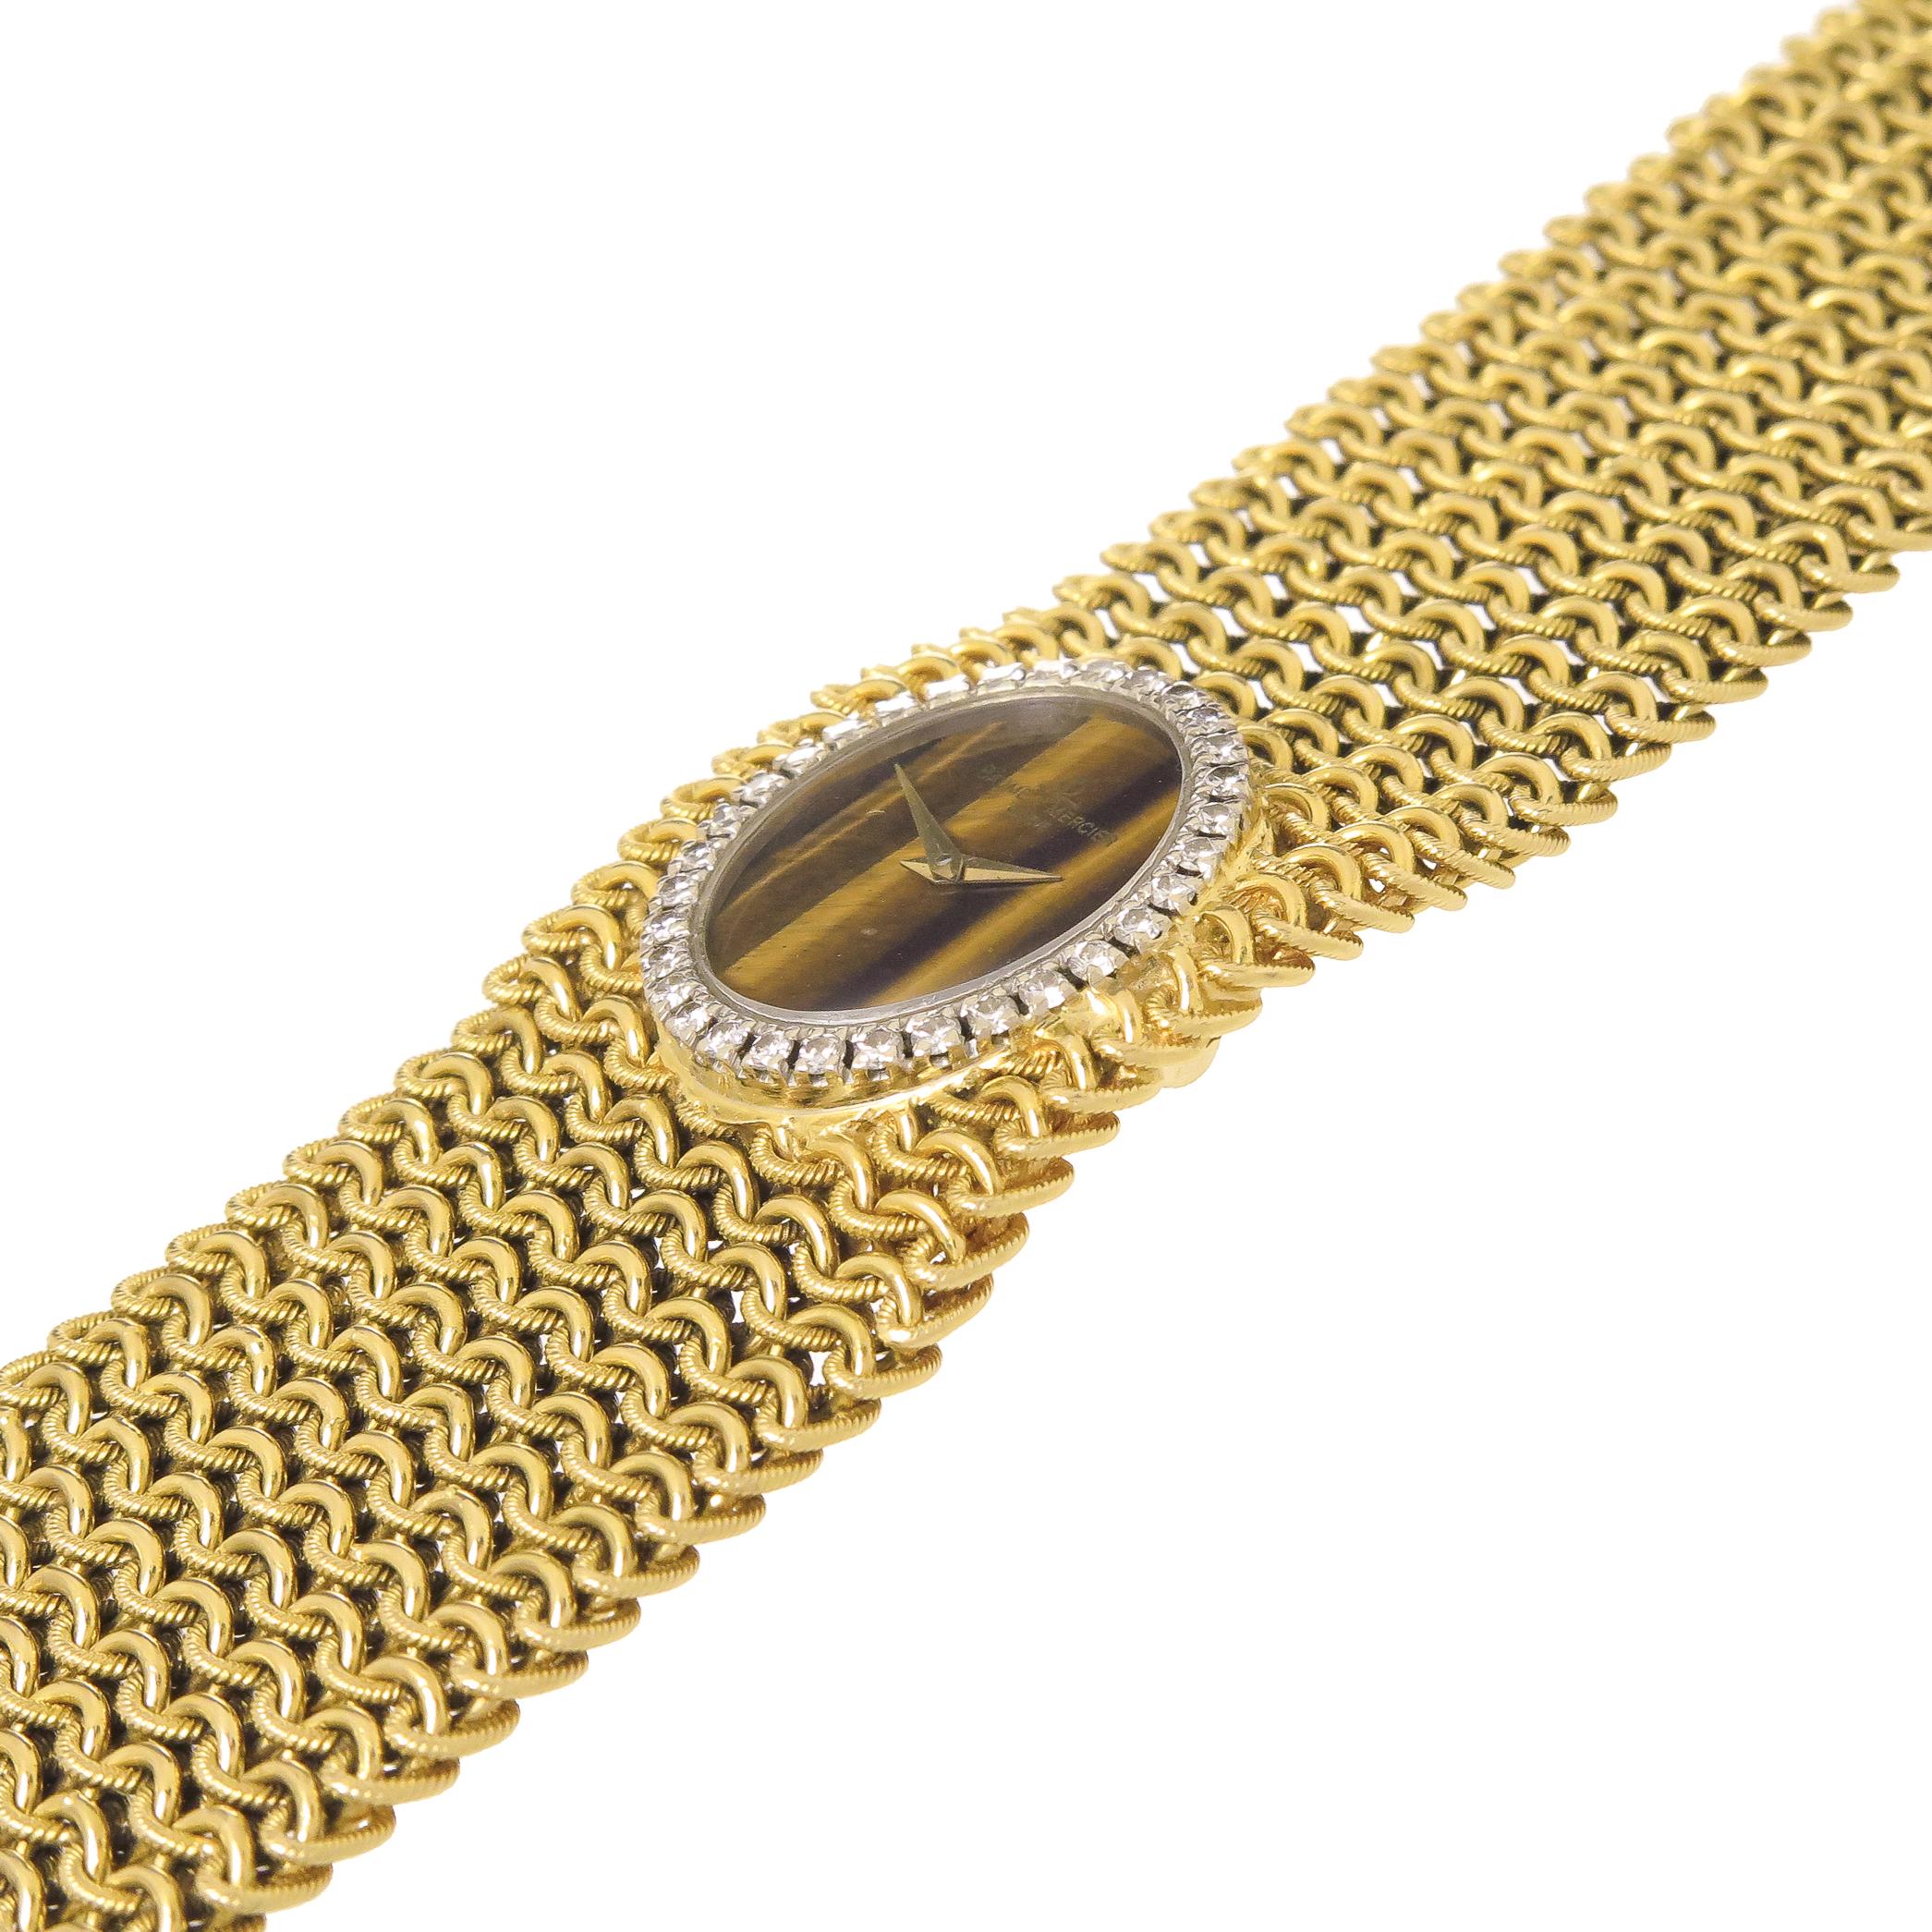 Circa 1970s Baum & Mercier Ladies 18K Yellow Gold Bracelet Wrist watch, a soft and flexible mesh link bracelet measuring 7 inches in length and 1 3/16 inch wide. White Gold Bezel set with Round Brilliant cut Diamonds totaling 1 Carat. Tigers Eye